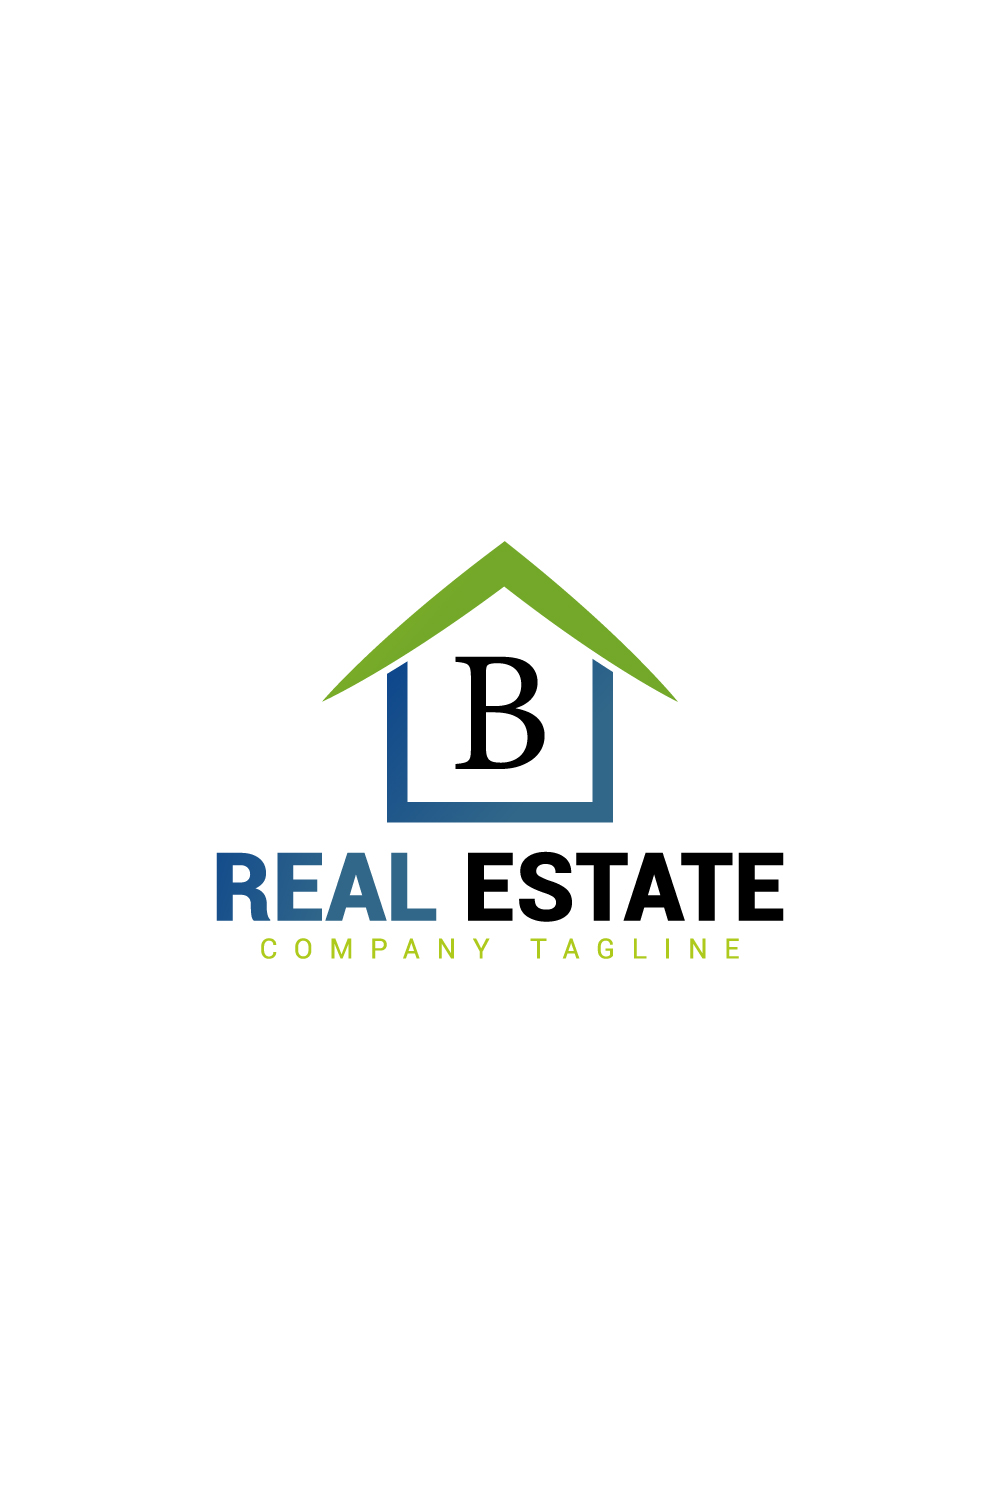 Real estate logo with green, dark blue color and B letter pinterest preview image.